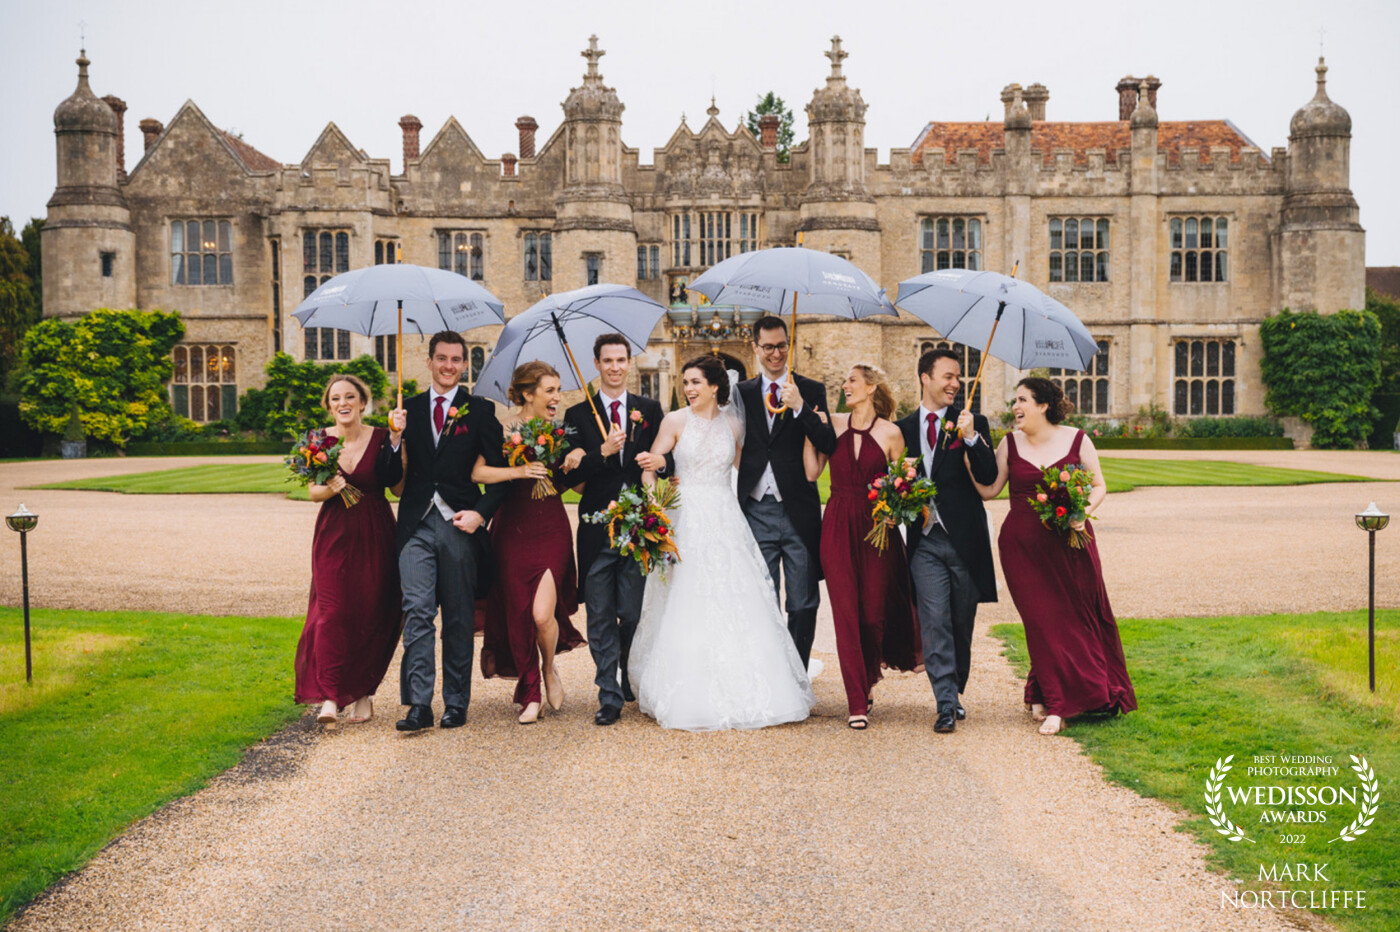 Diana & Dan's amazing wedding at the suitably awesome Hengrave Hall in Suffolk. Who said rains dampens the spirits on a wedding day? Besides it said to be good luck if it rains on your wedding day! If my couples are up for it I'm there with my camera. I love it when my couples embrace whatever the day throws at them. Pictures like this make the day more memorable. Thank you guys.